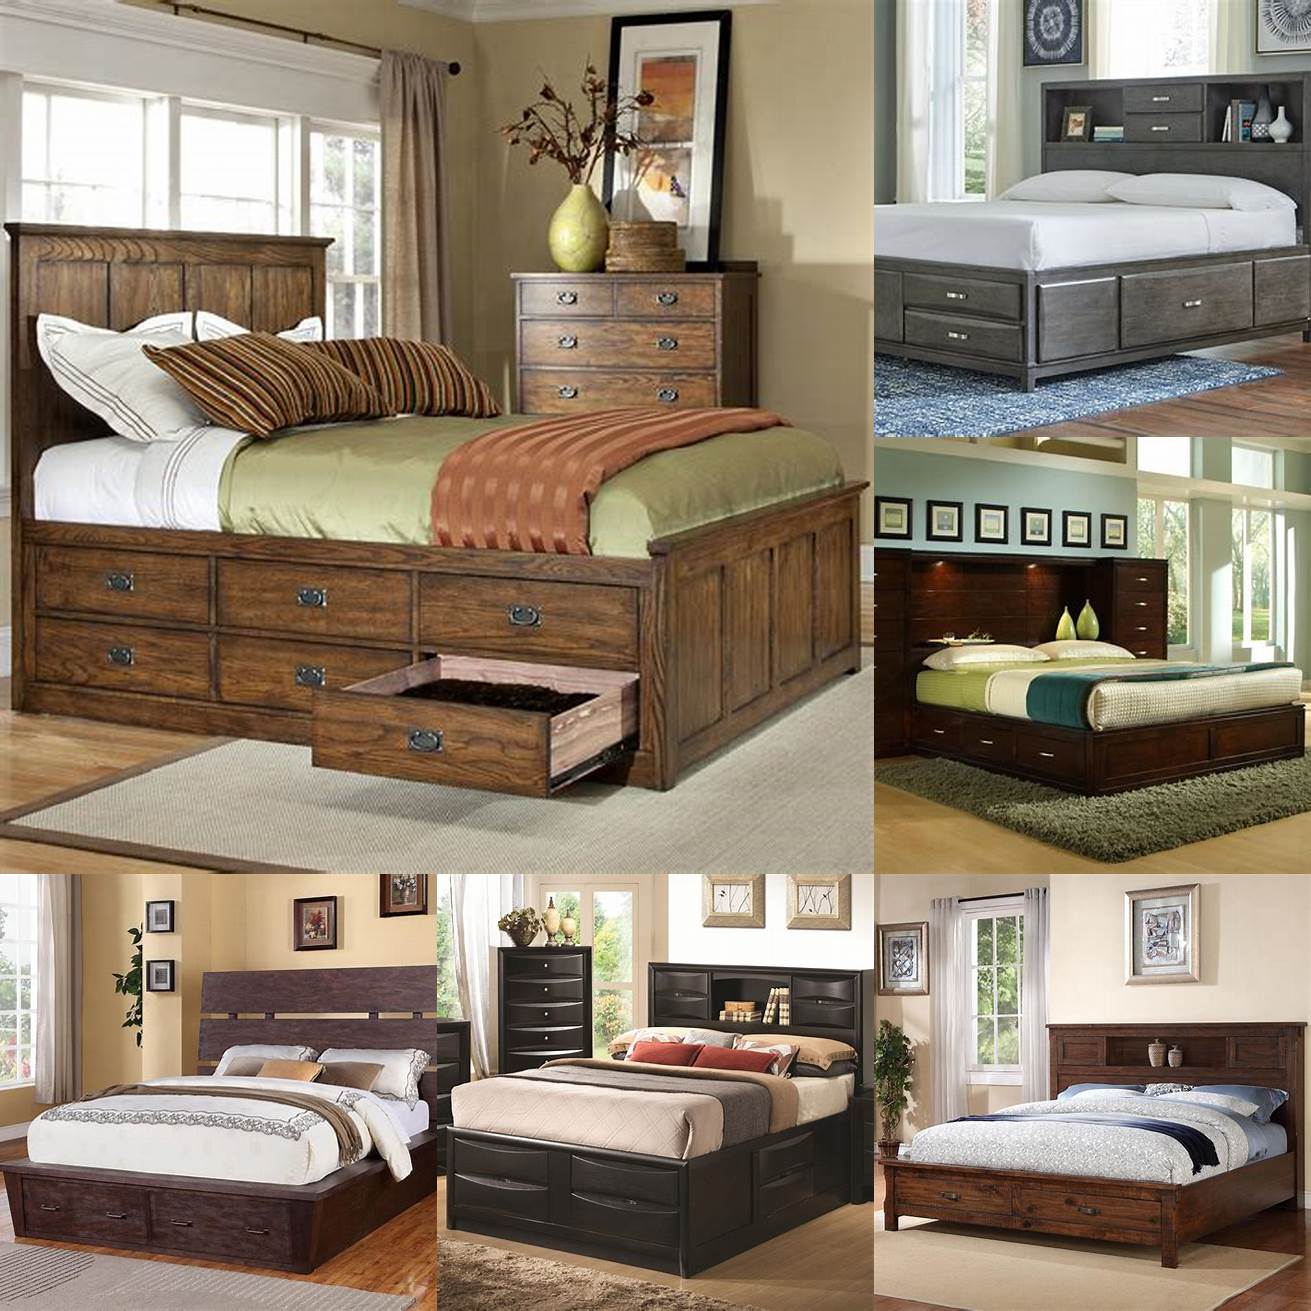 King bed with drawers and matching furniture